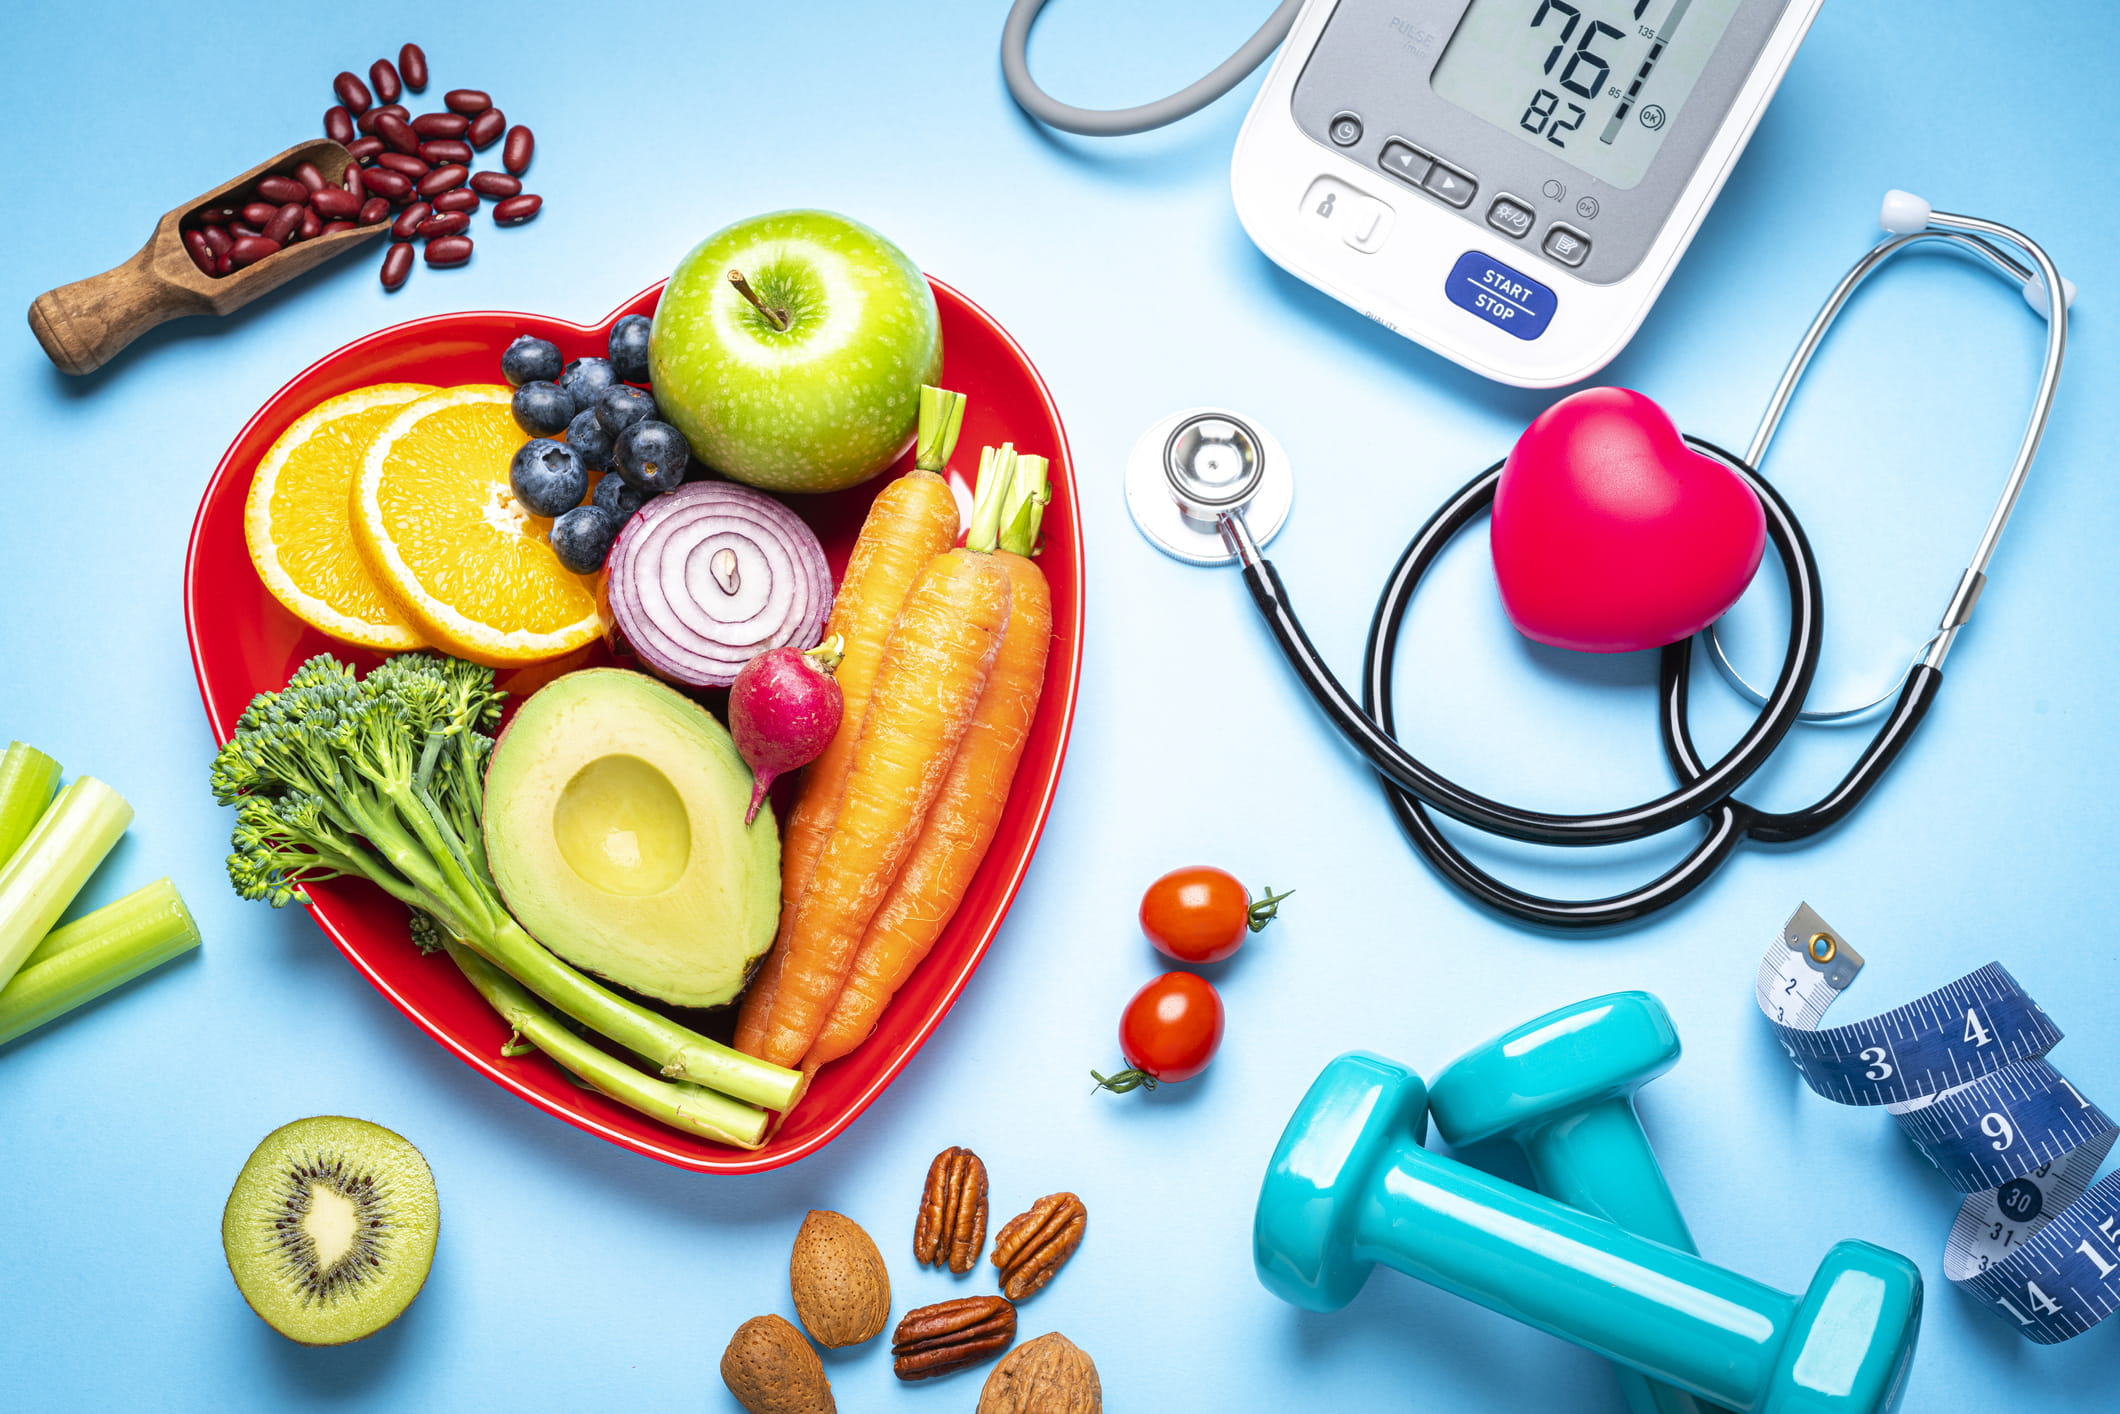 Items representing a healthy lifestyle: Fruits and vegetables, hand weights, stethoscope and blood pressure machine